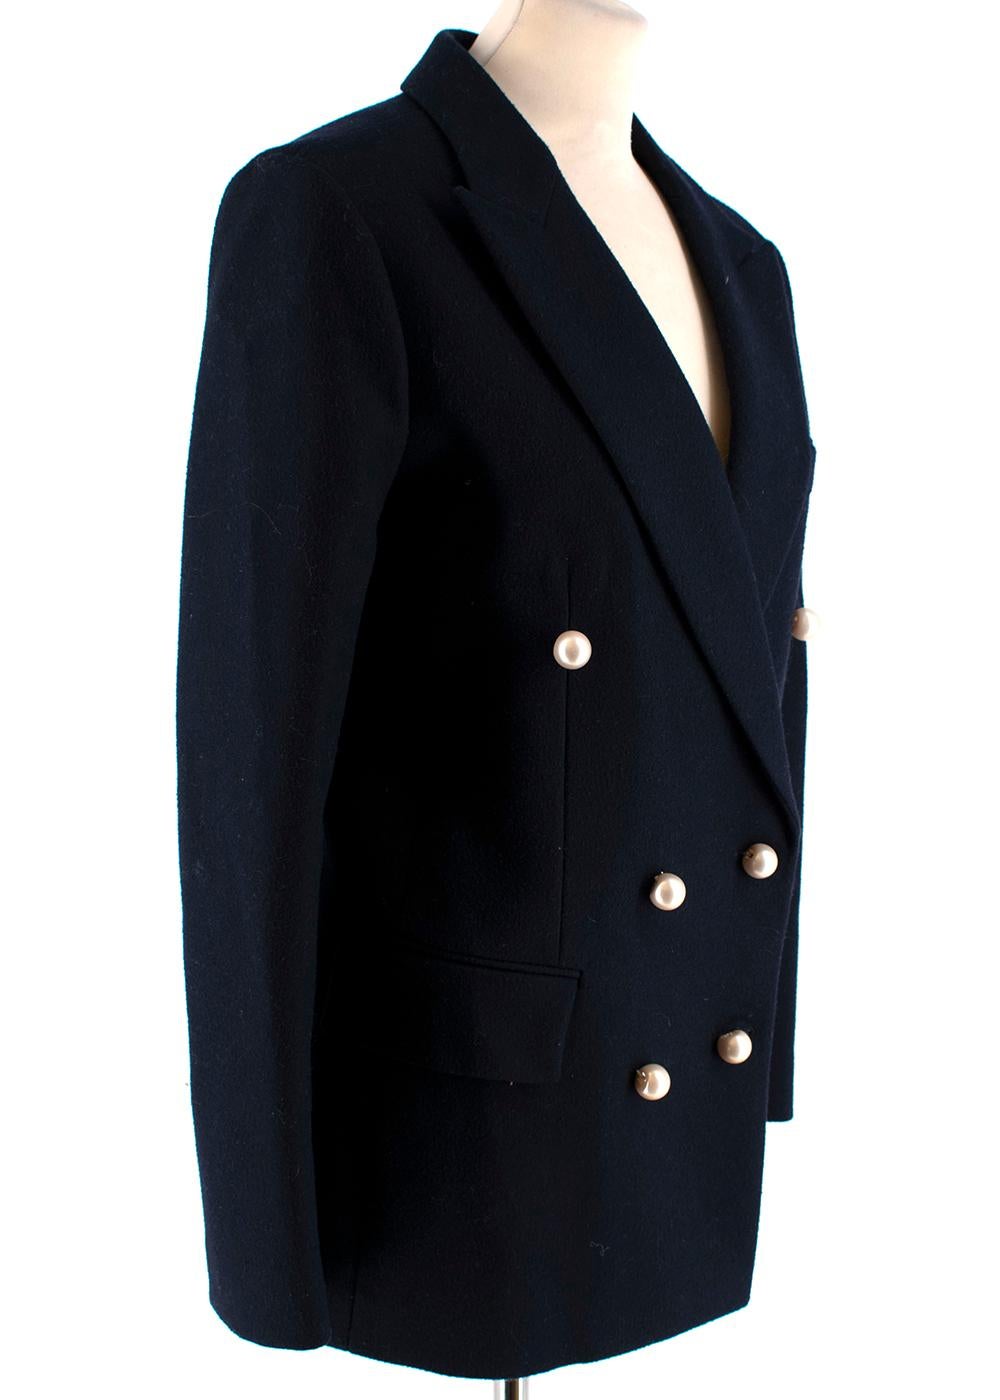 Celine Navy Classic Jacket

- Faux-pearl chunky buttons
- Double Breasted fastening
- Revere collar
- Patch pockets
- Semi-structured shoulders
- Silk blue lining
- Warm material for the winter

Fabric Composition: 100% Wool

Made in Italy

Shoulder